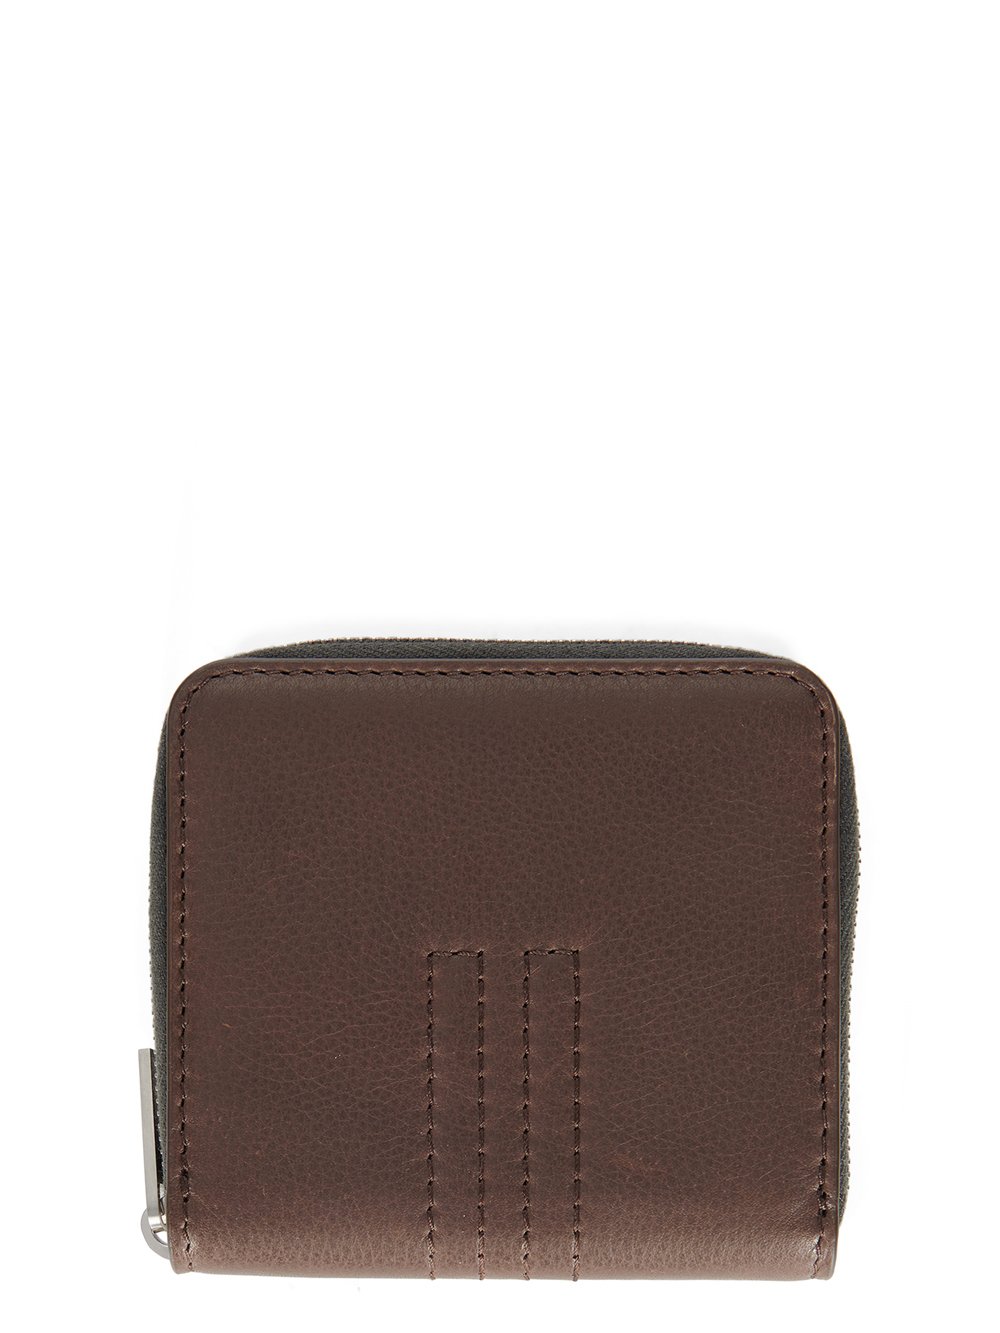 RICK OWENS FW23 LUXOR ZIPPED WALLET IN BROWN SOFT GRAIN COW LEATHER